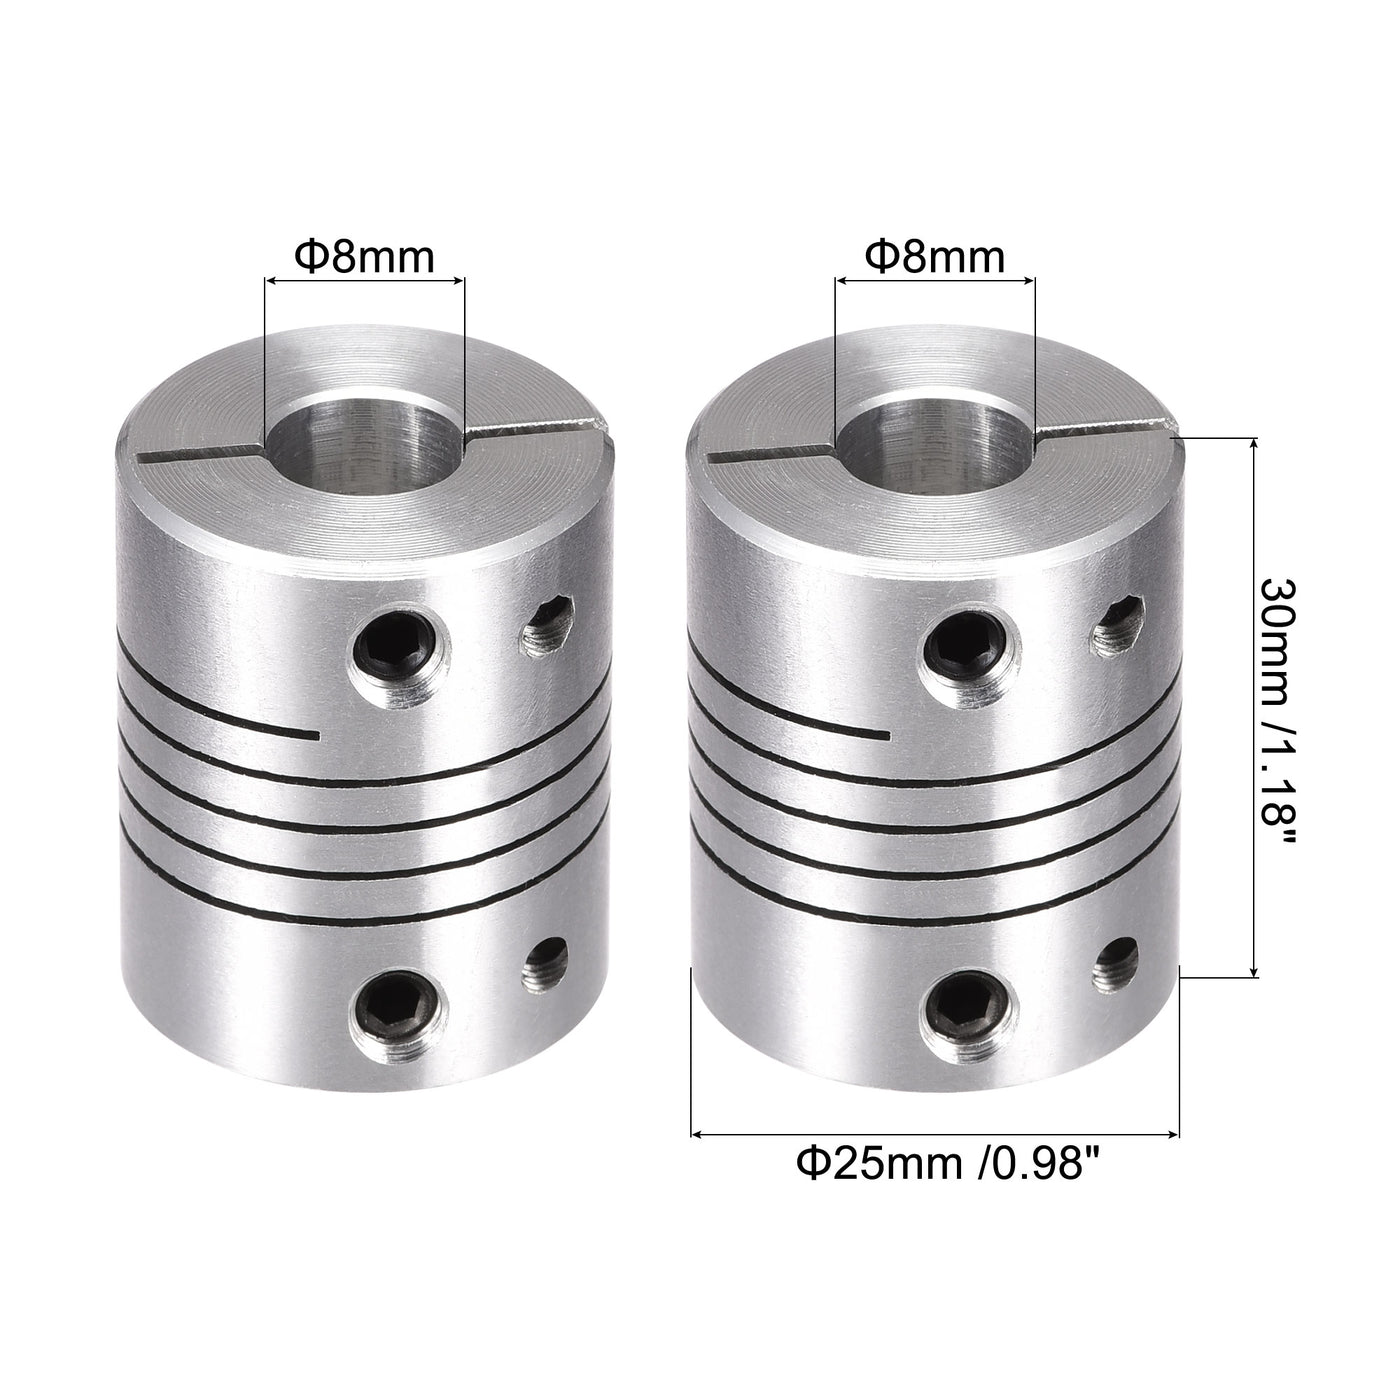 uxcell Uxcell 2PCS Motor Shaft 8mm to 8mm Helical Beam Coupler Coupling 25mm Dia 30mm Length